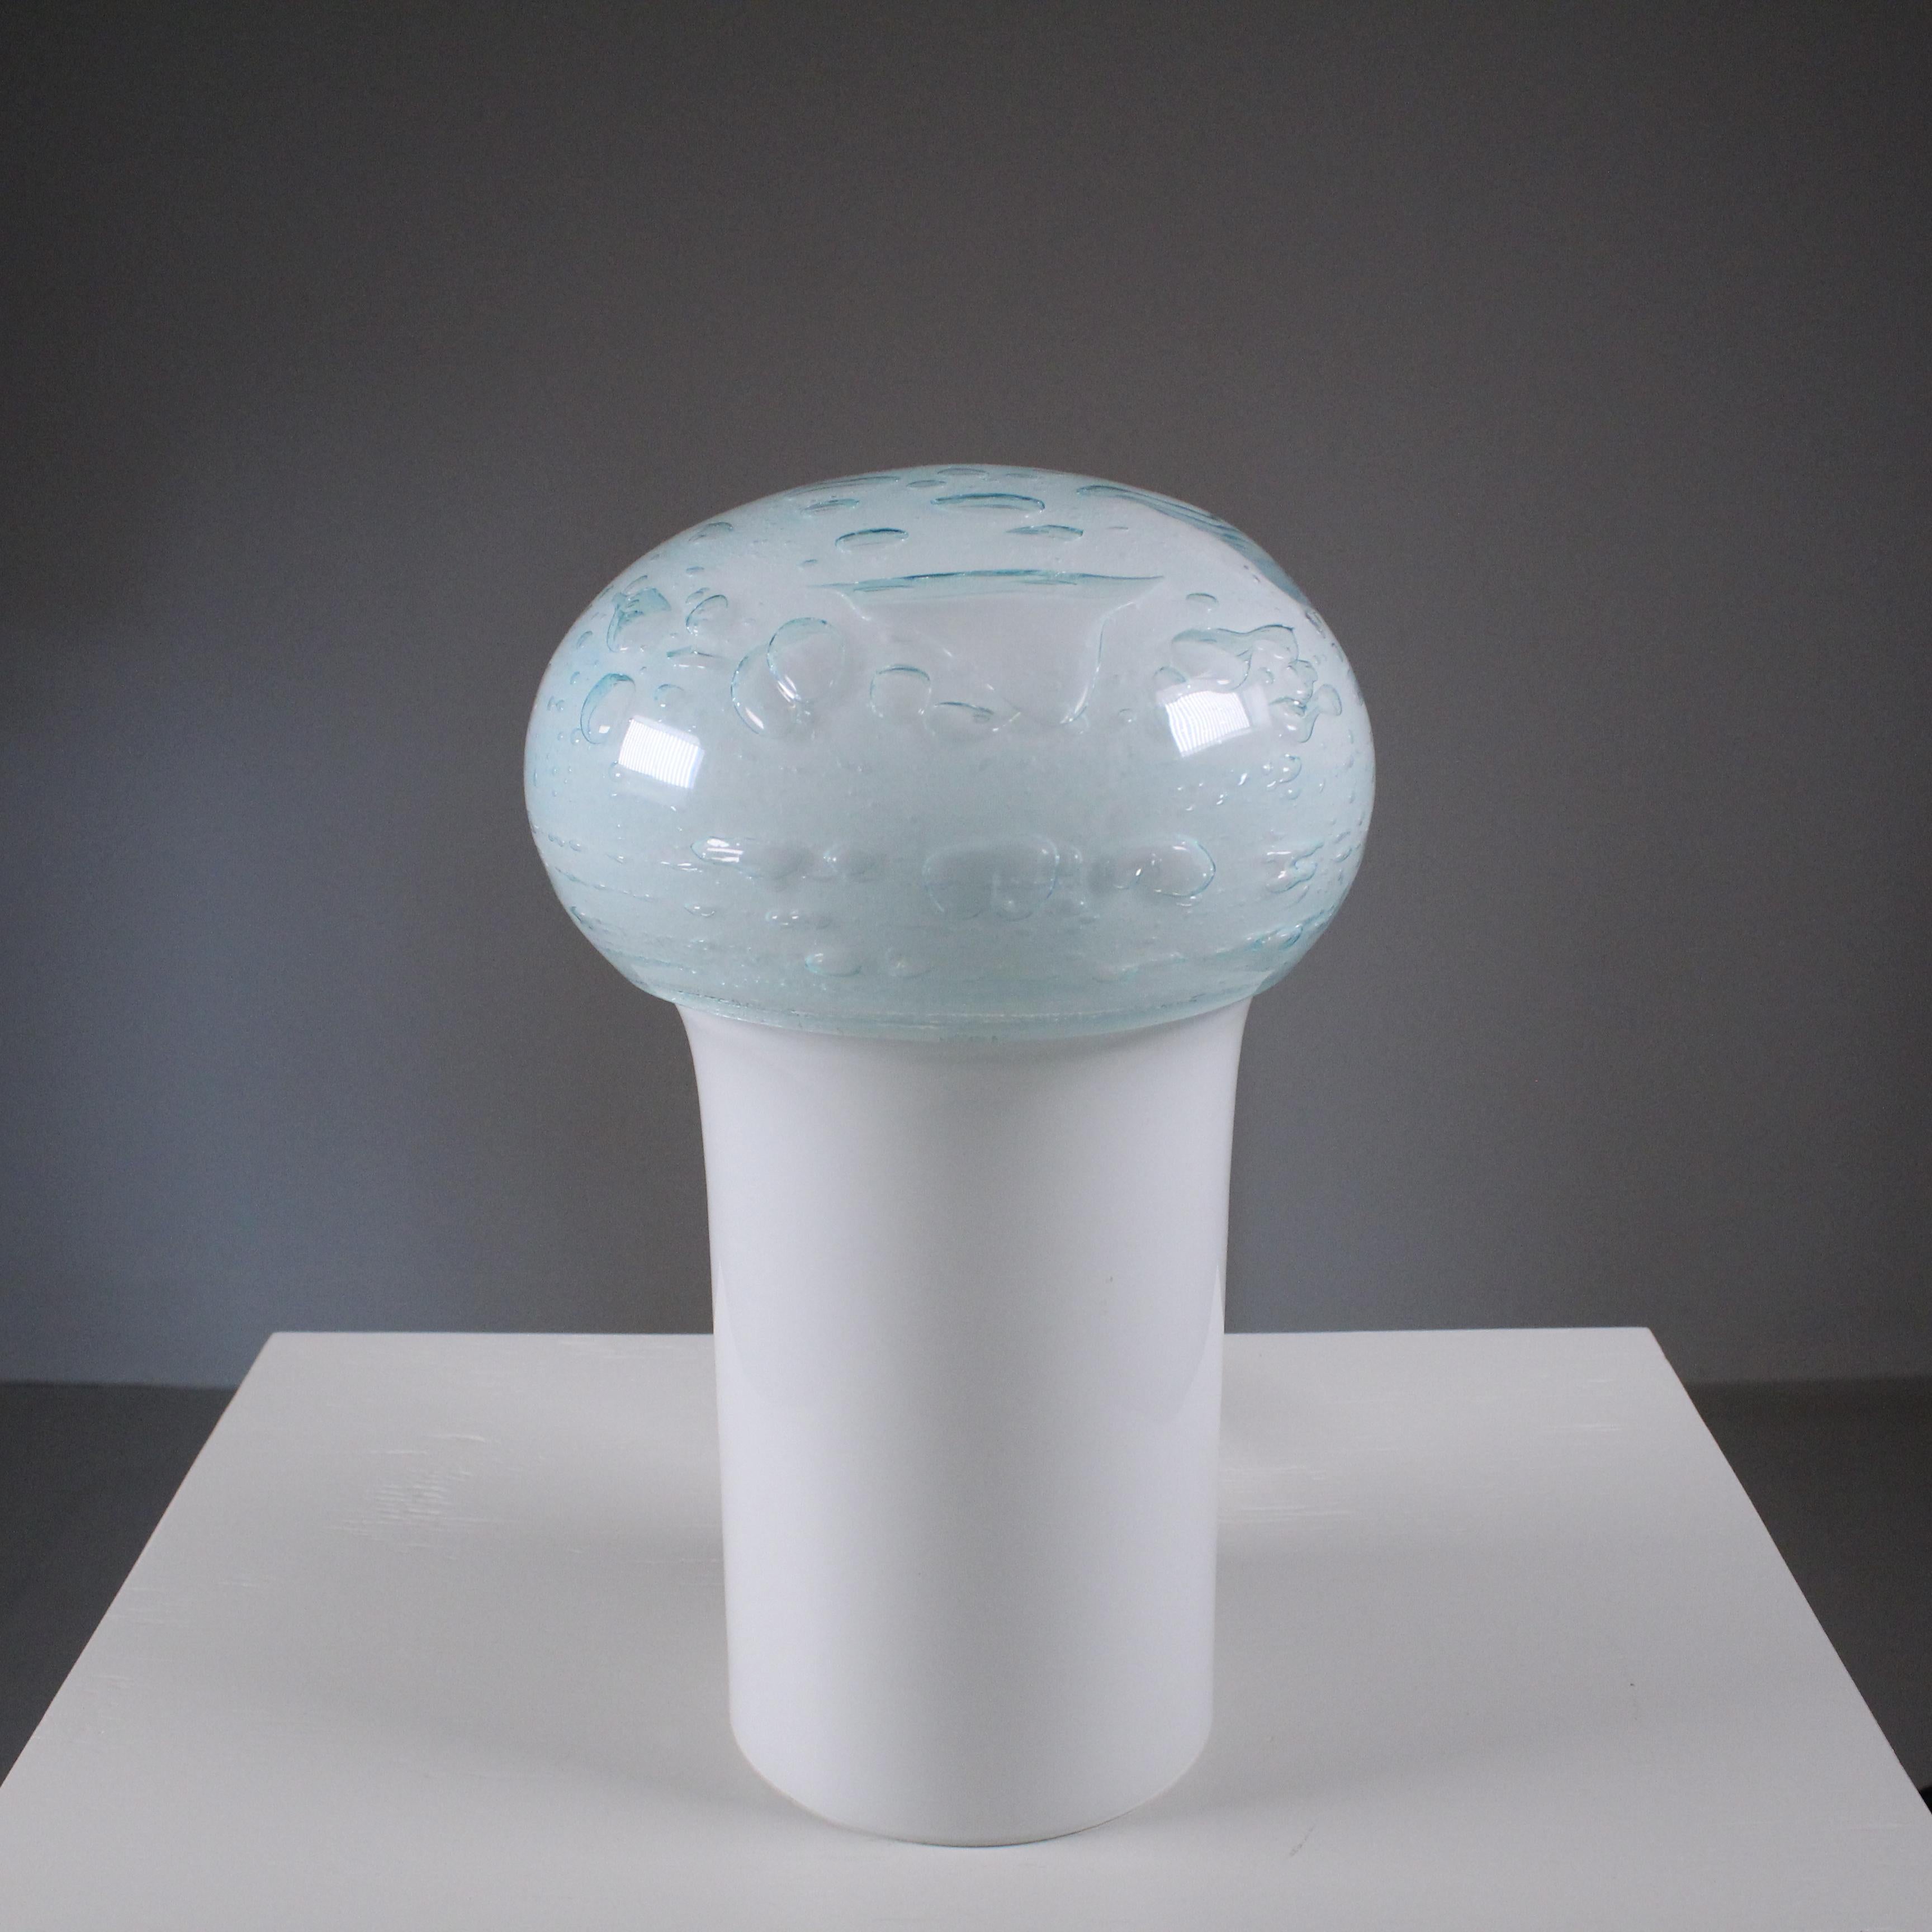 The mushroom-shaped table lamp by Vistosi, crafted in Murano bubble glass, is a captivating work that seamlessly combines artisanal mastery and contemporary design. This exceptional lighting piece captures the essence of Murano glass artistry and